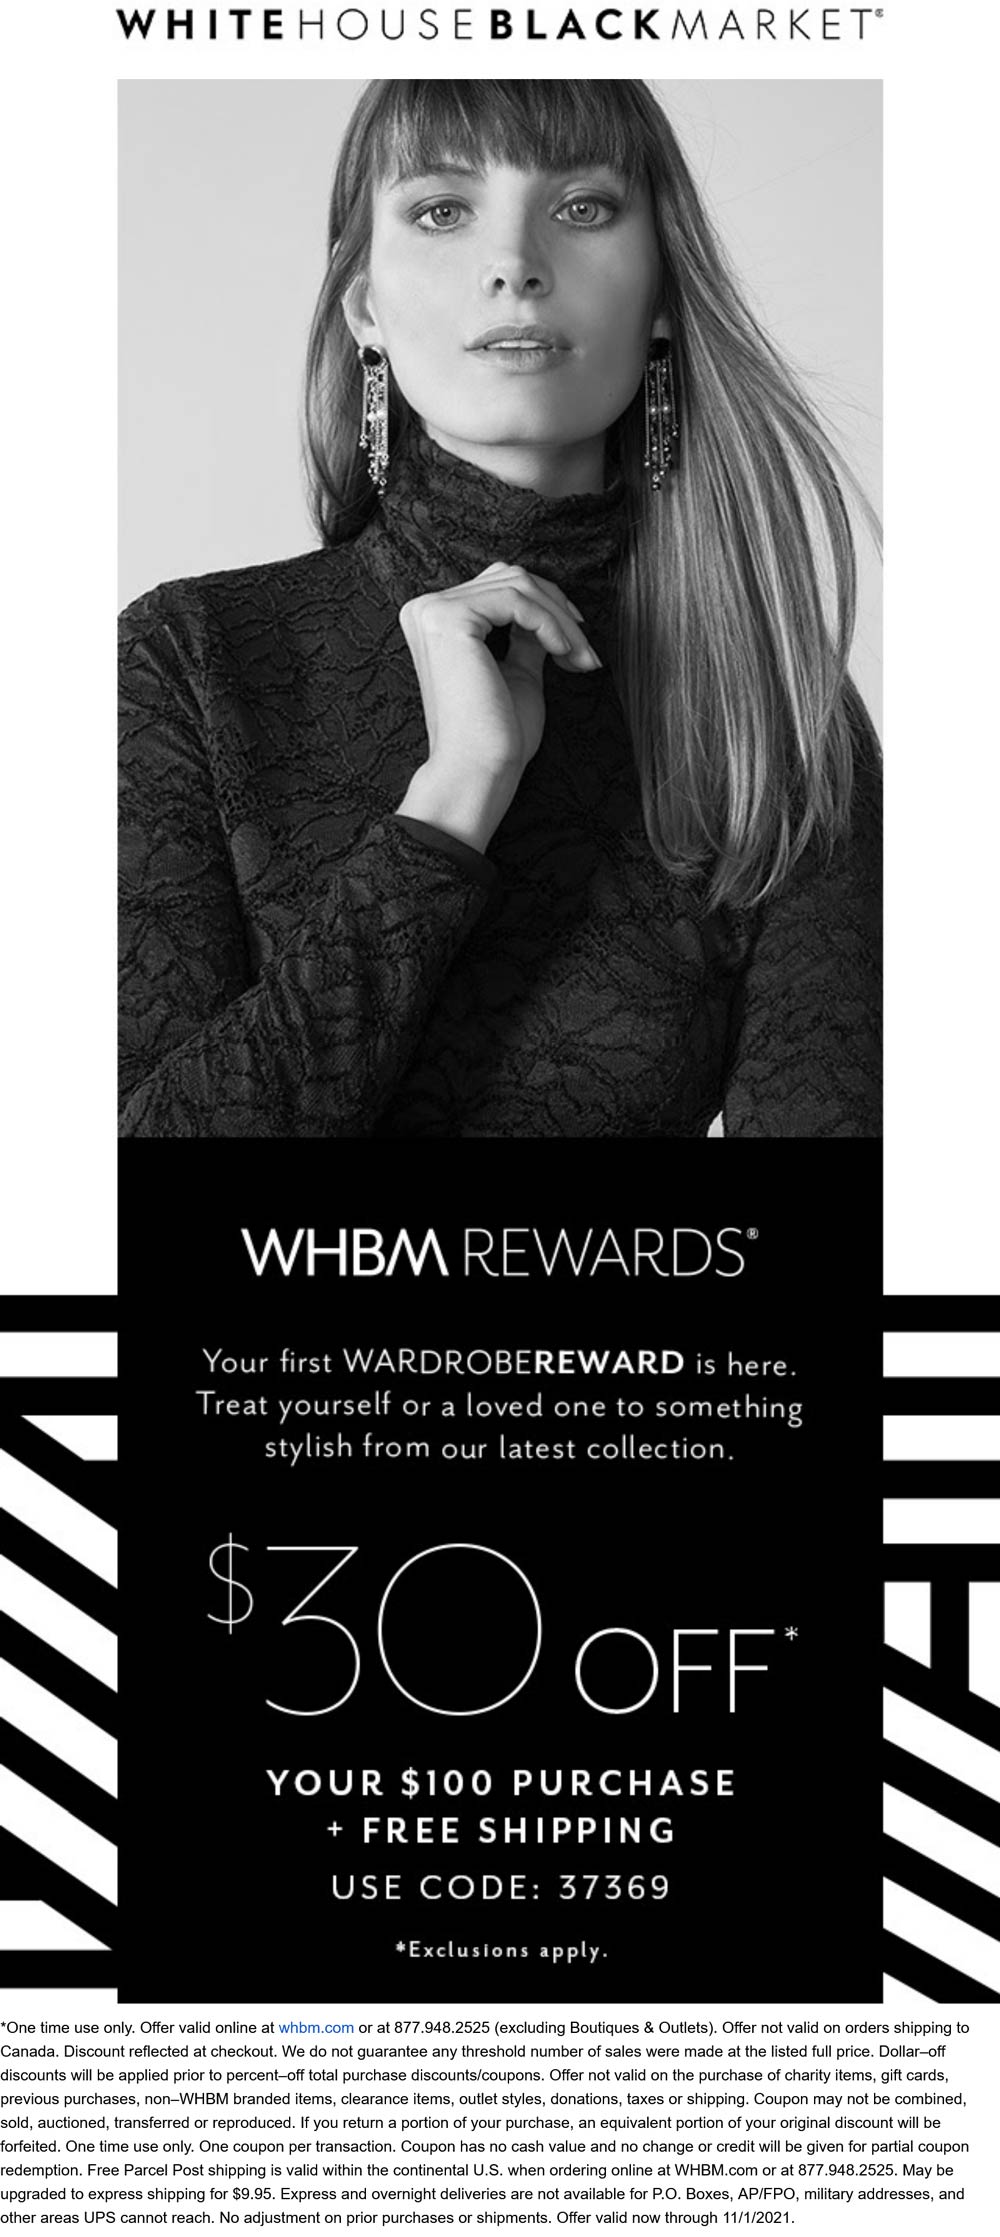 White House Black Market stores Coupon  $30 off $100 at White House Black Market via promo code 37369 #whitehouseblackmarket 